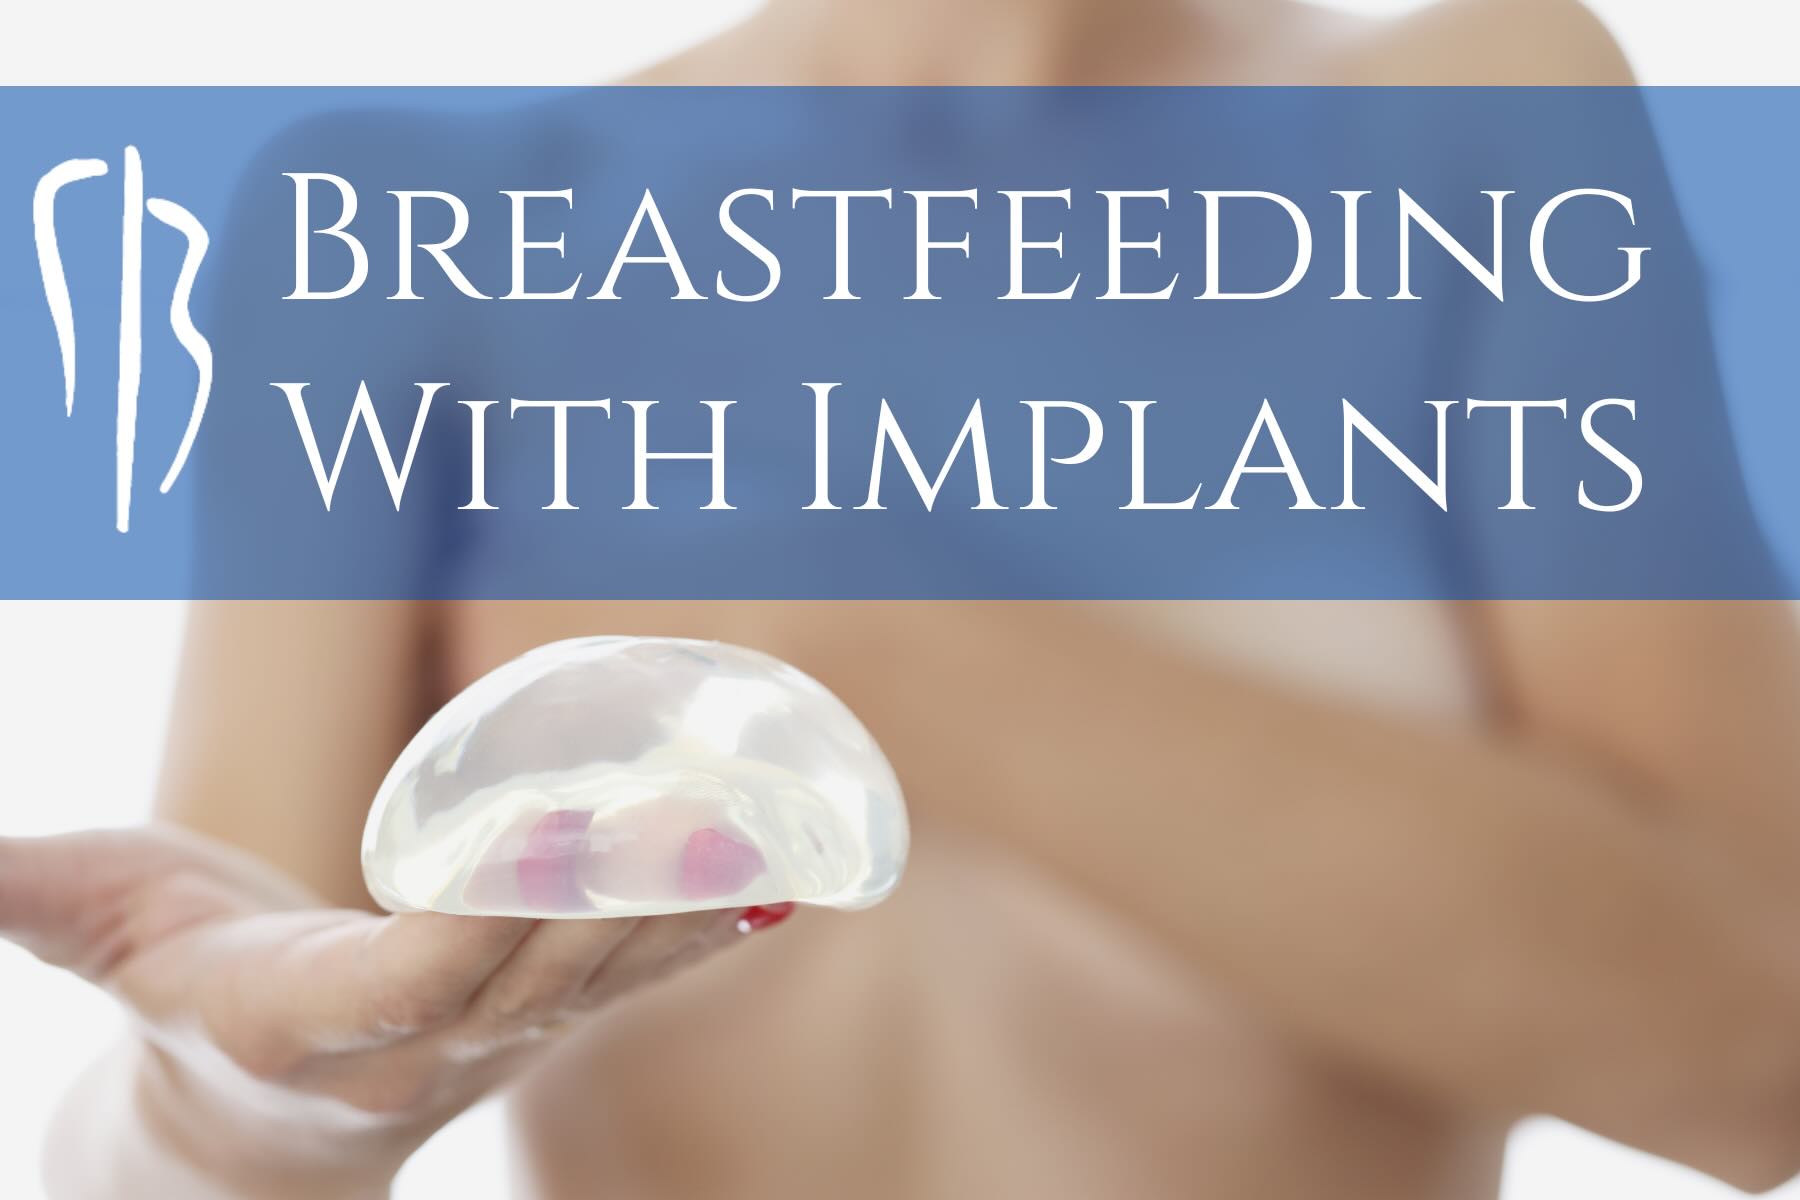 women holding implant with Breastfeeding with Implants on image